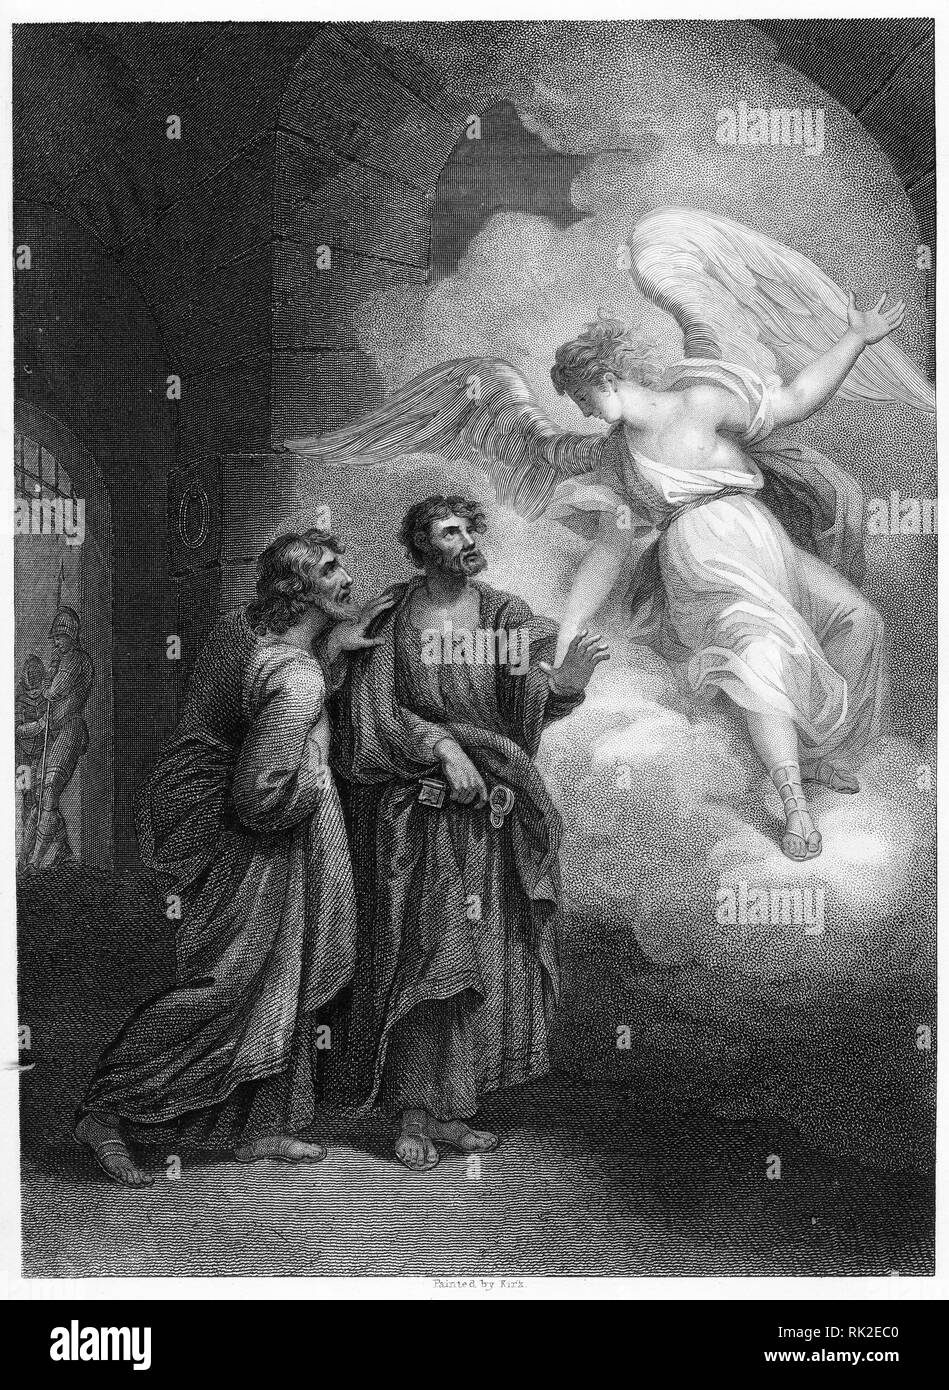 Engraving of an angel freeing the apostles. From The Self-Interpeting Bible, perhaps the 1843 edition. Stock Photo